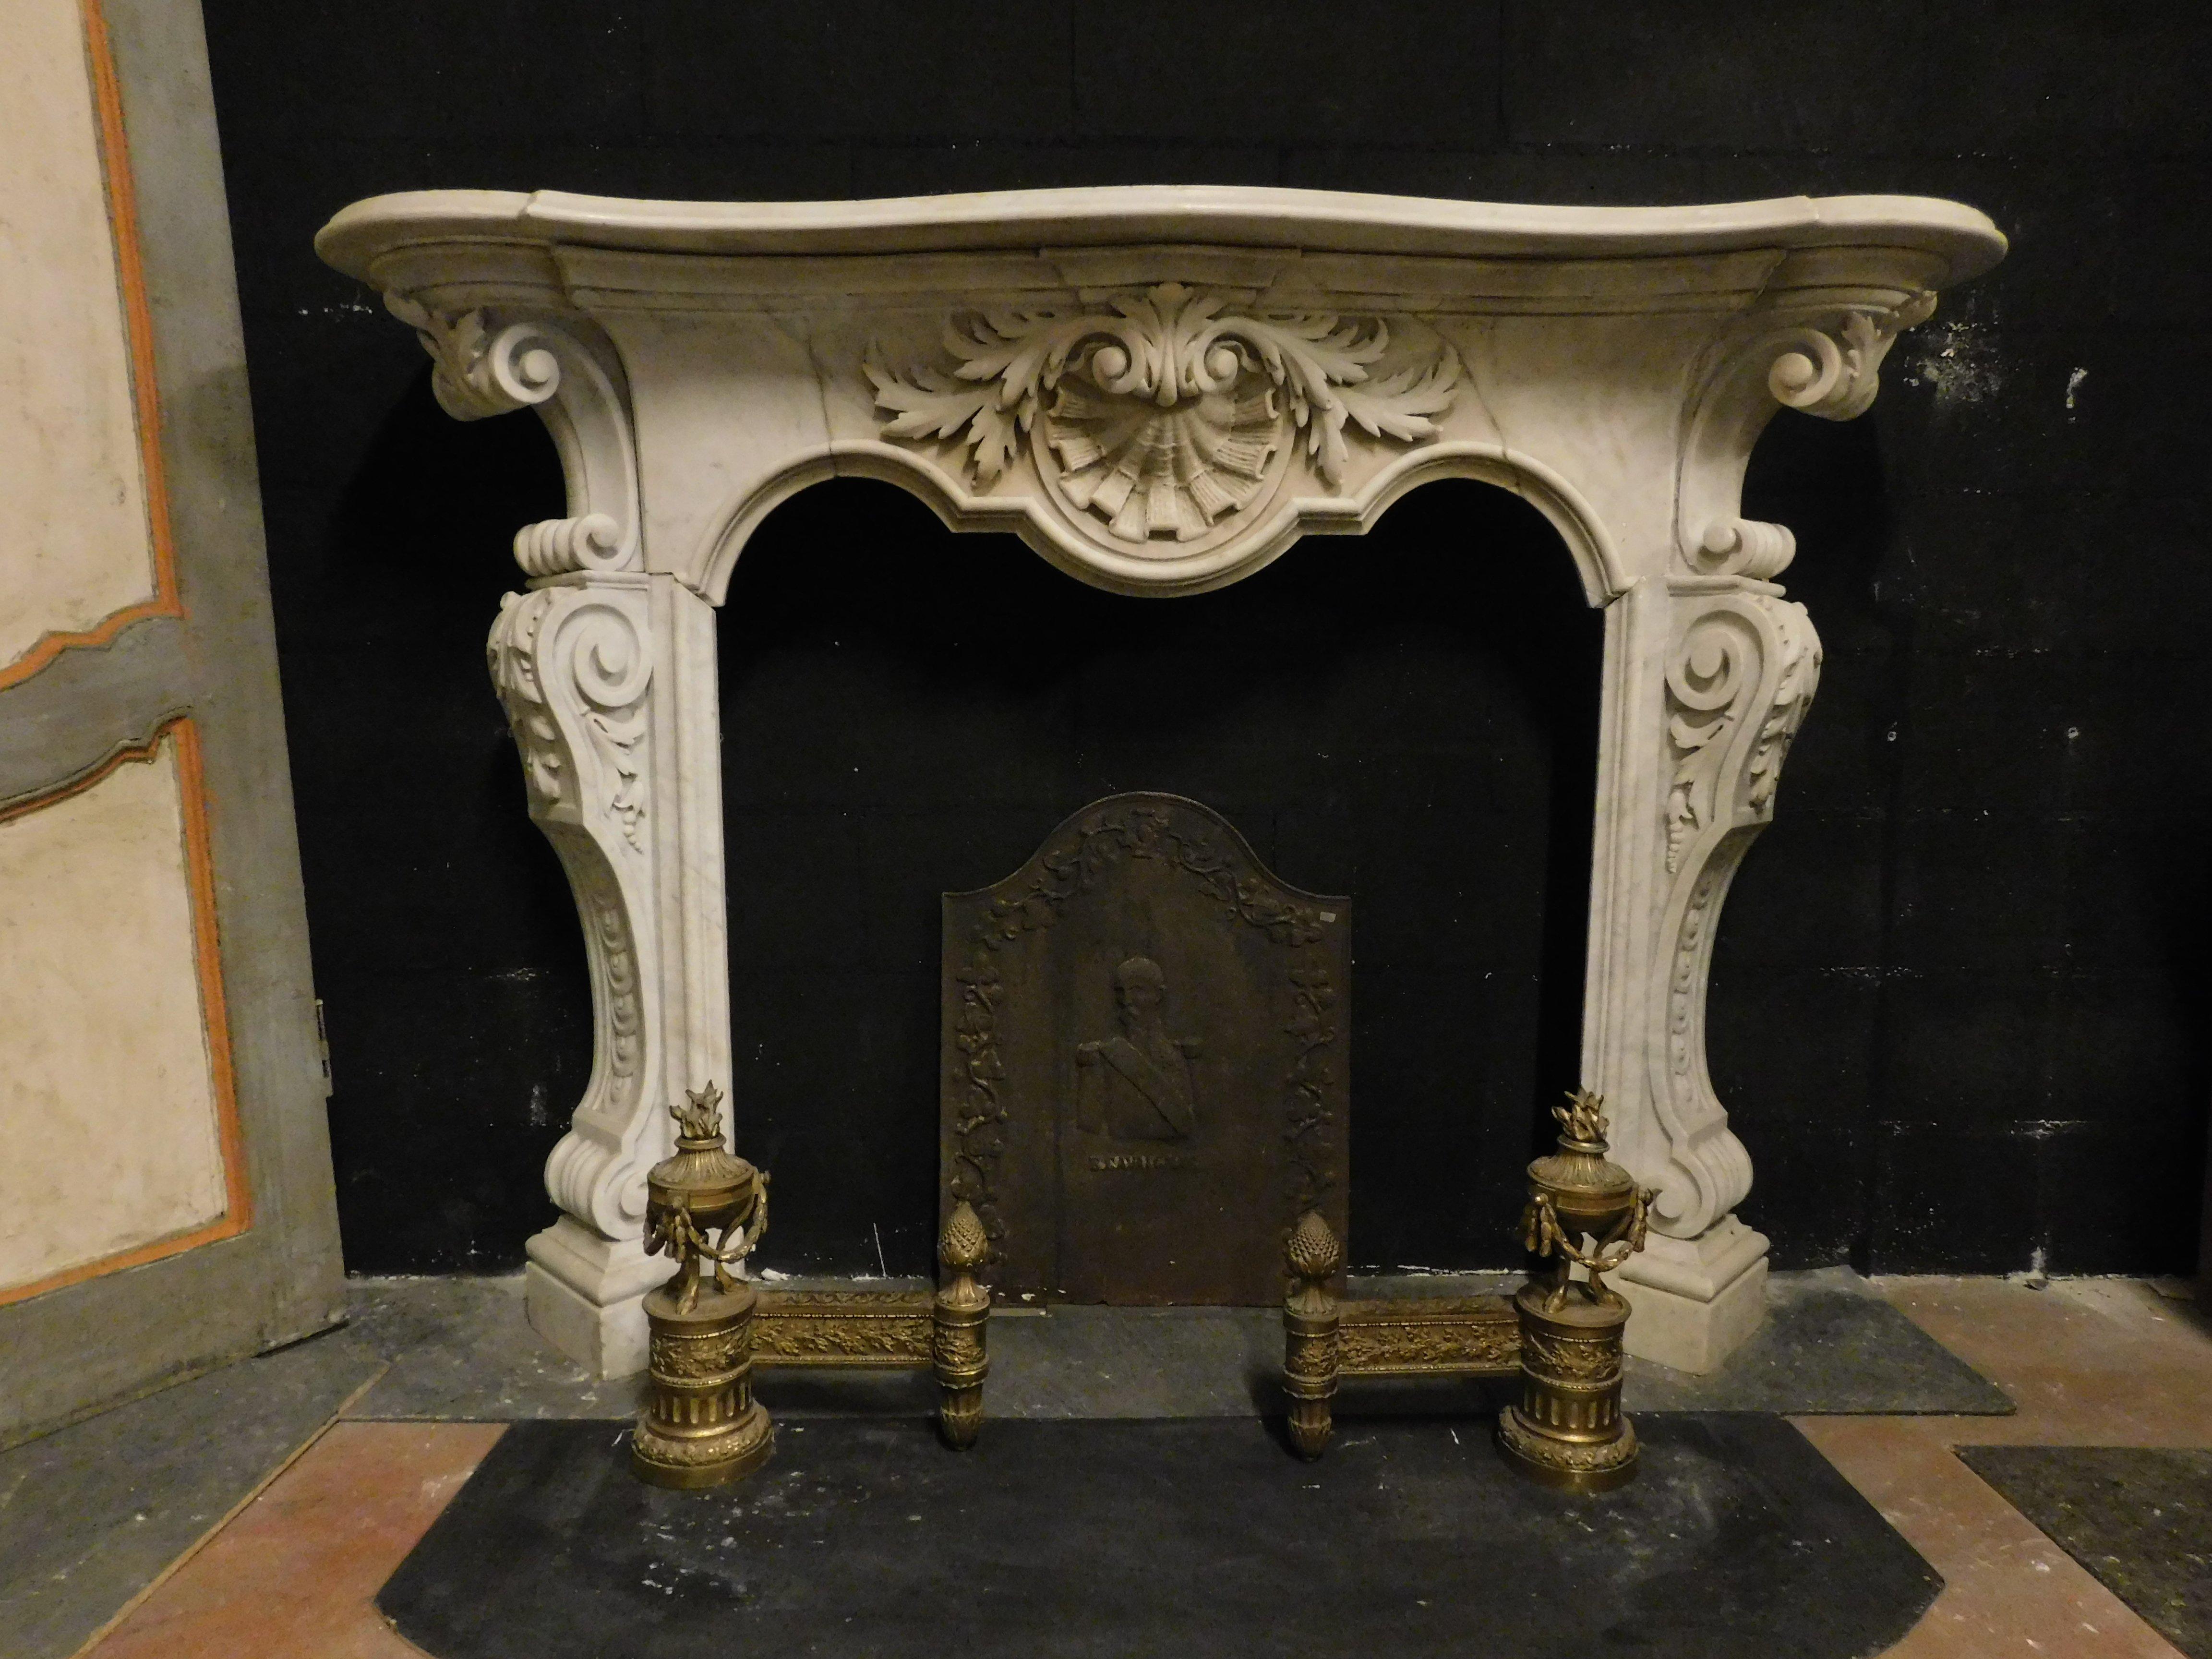 Ancient and important Fireplace, mantle built by hand in precious white marble, richly carved by hand with motifs of shells and flowers, typical decorations of the 19th century, built for an important palace in Italy.
Taste of the era and refined